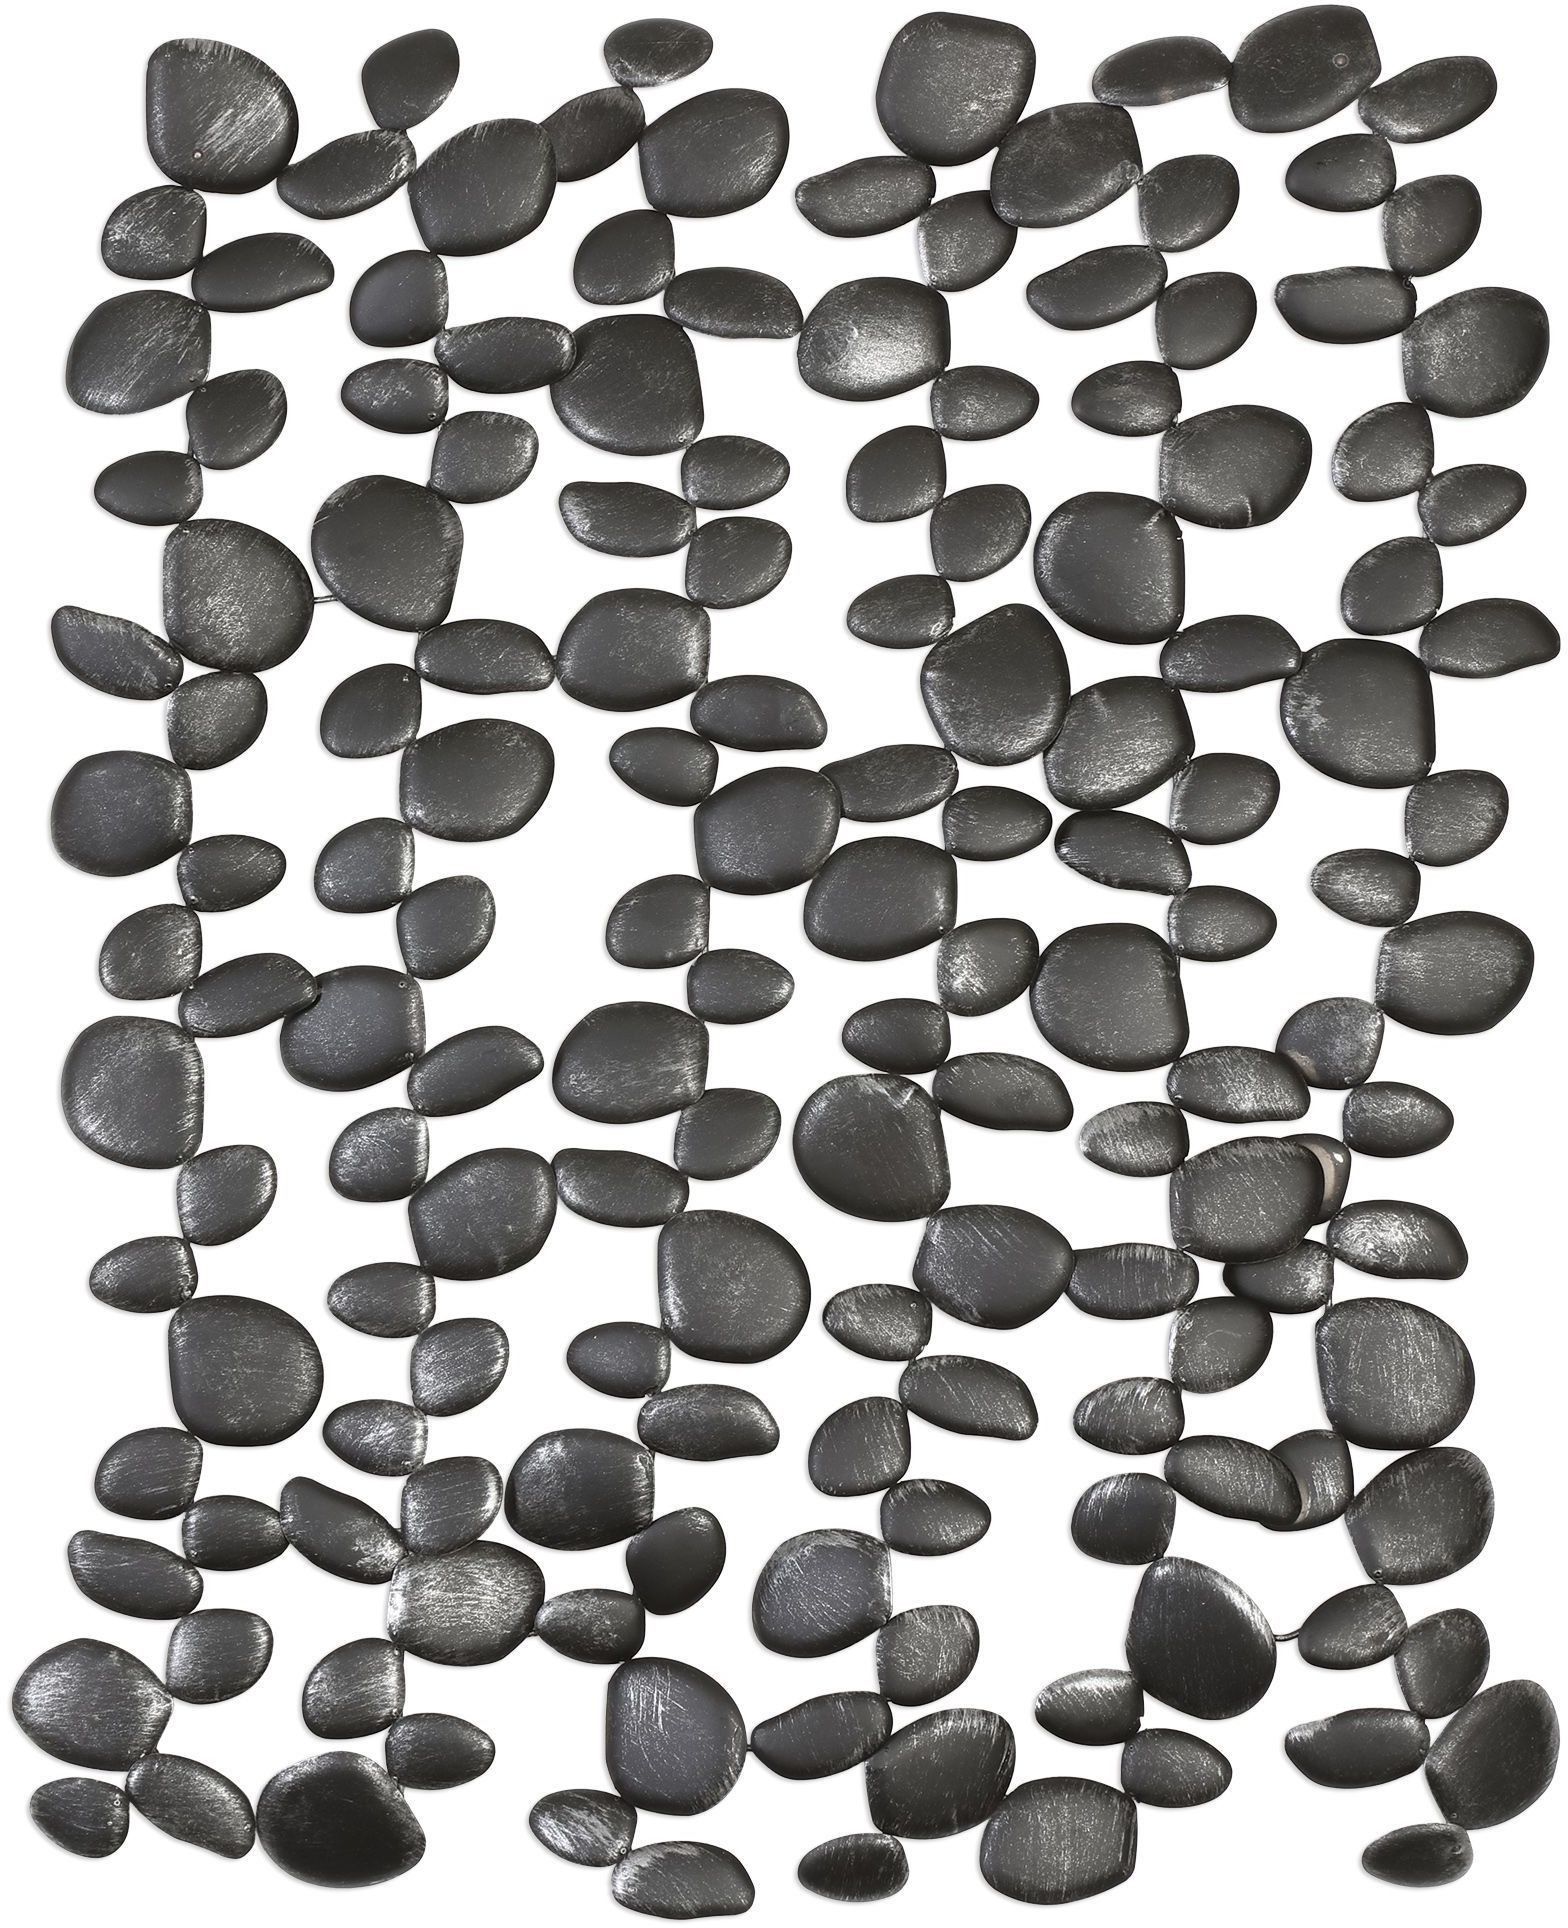 Skipping Stones Forged Iron Wall Art From Uttermost | Coleman Furniture Intended For 2018 Stones Wall Art (View 20 of 20)